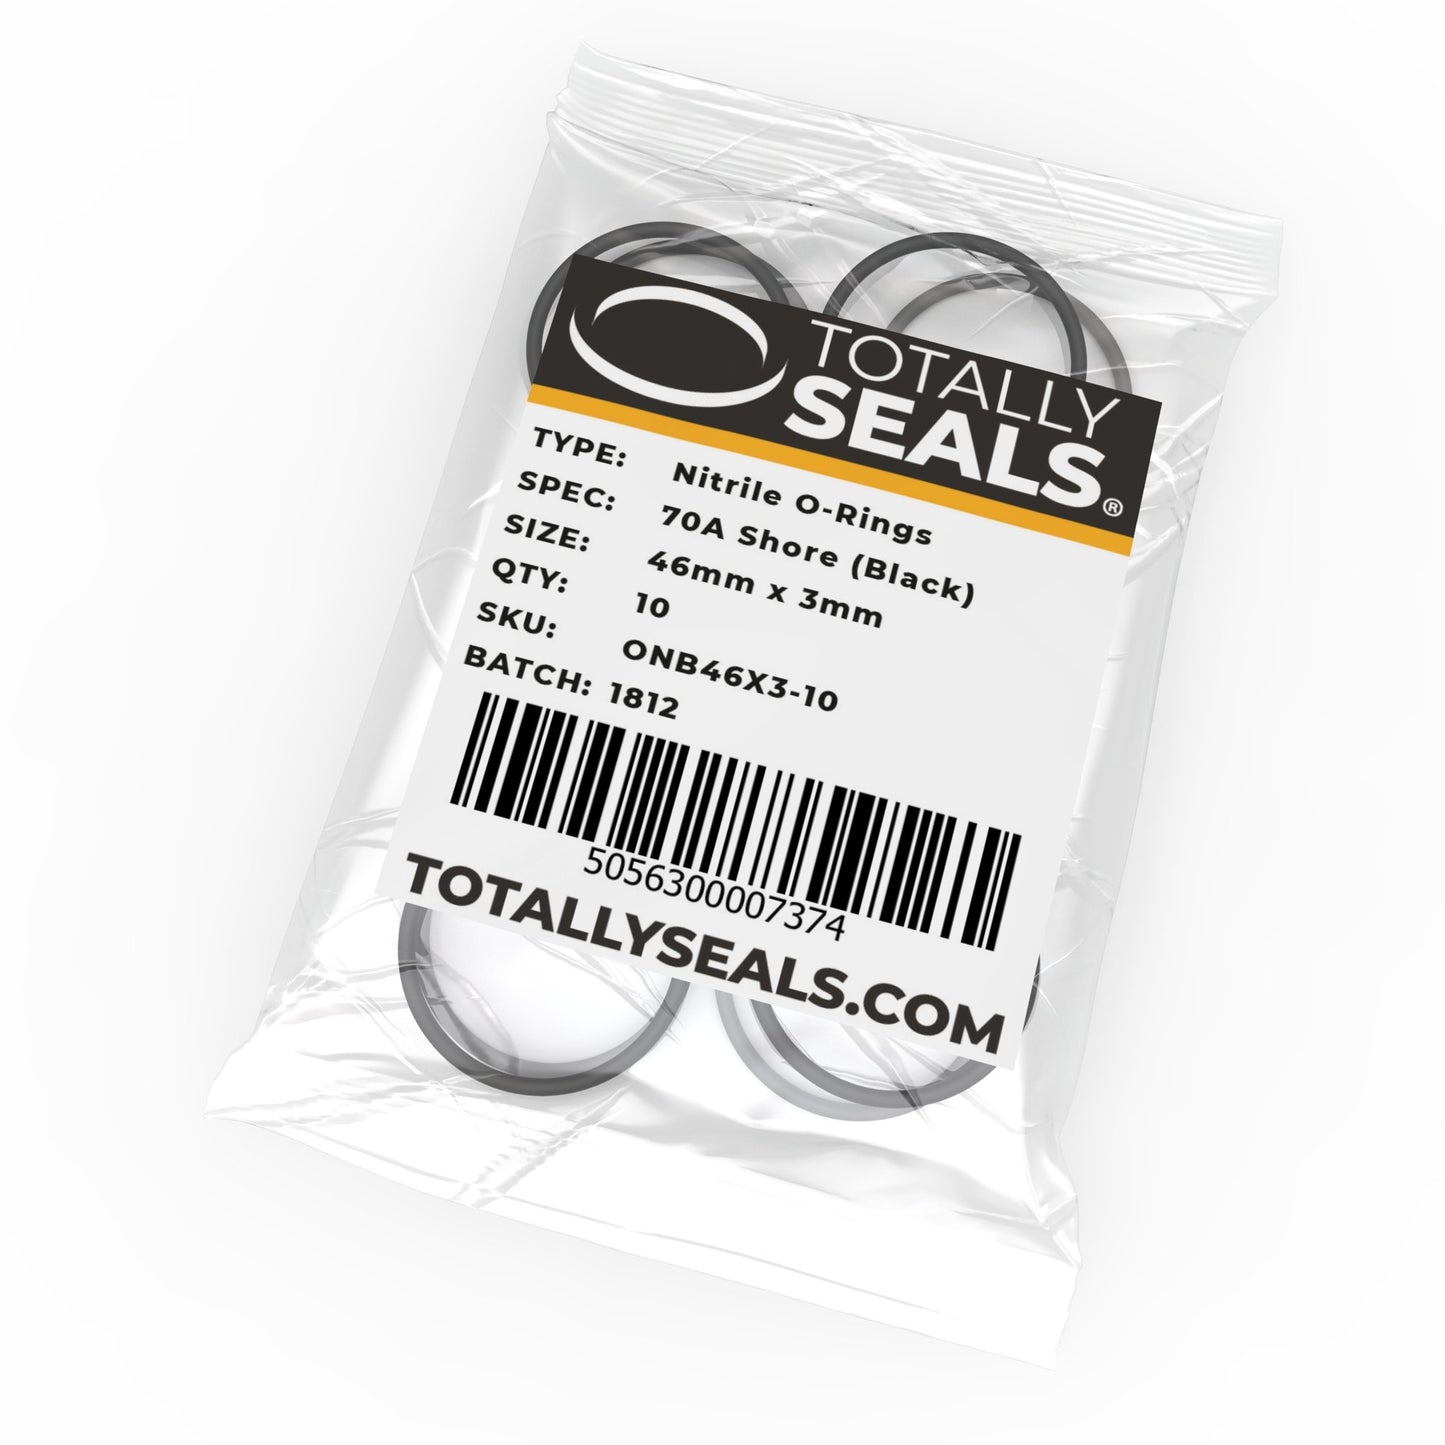 46mm x 3mm (52mm OD) Nitrile O-Rings - Totally Seals®